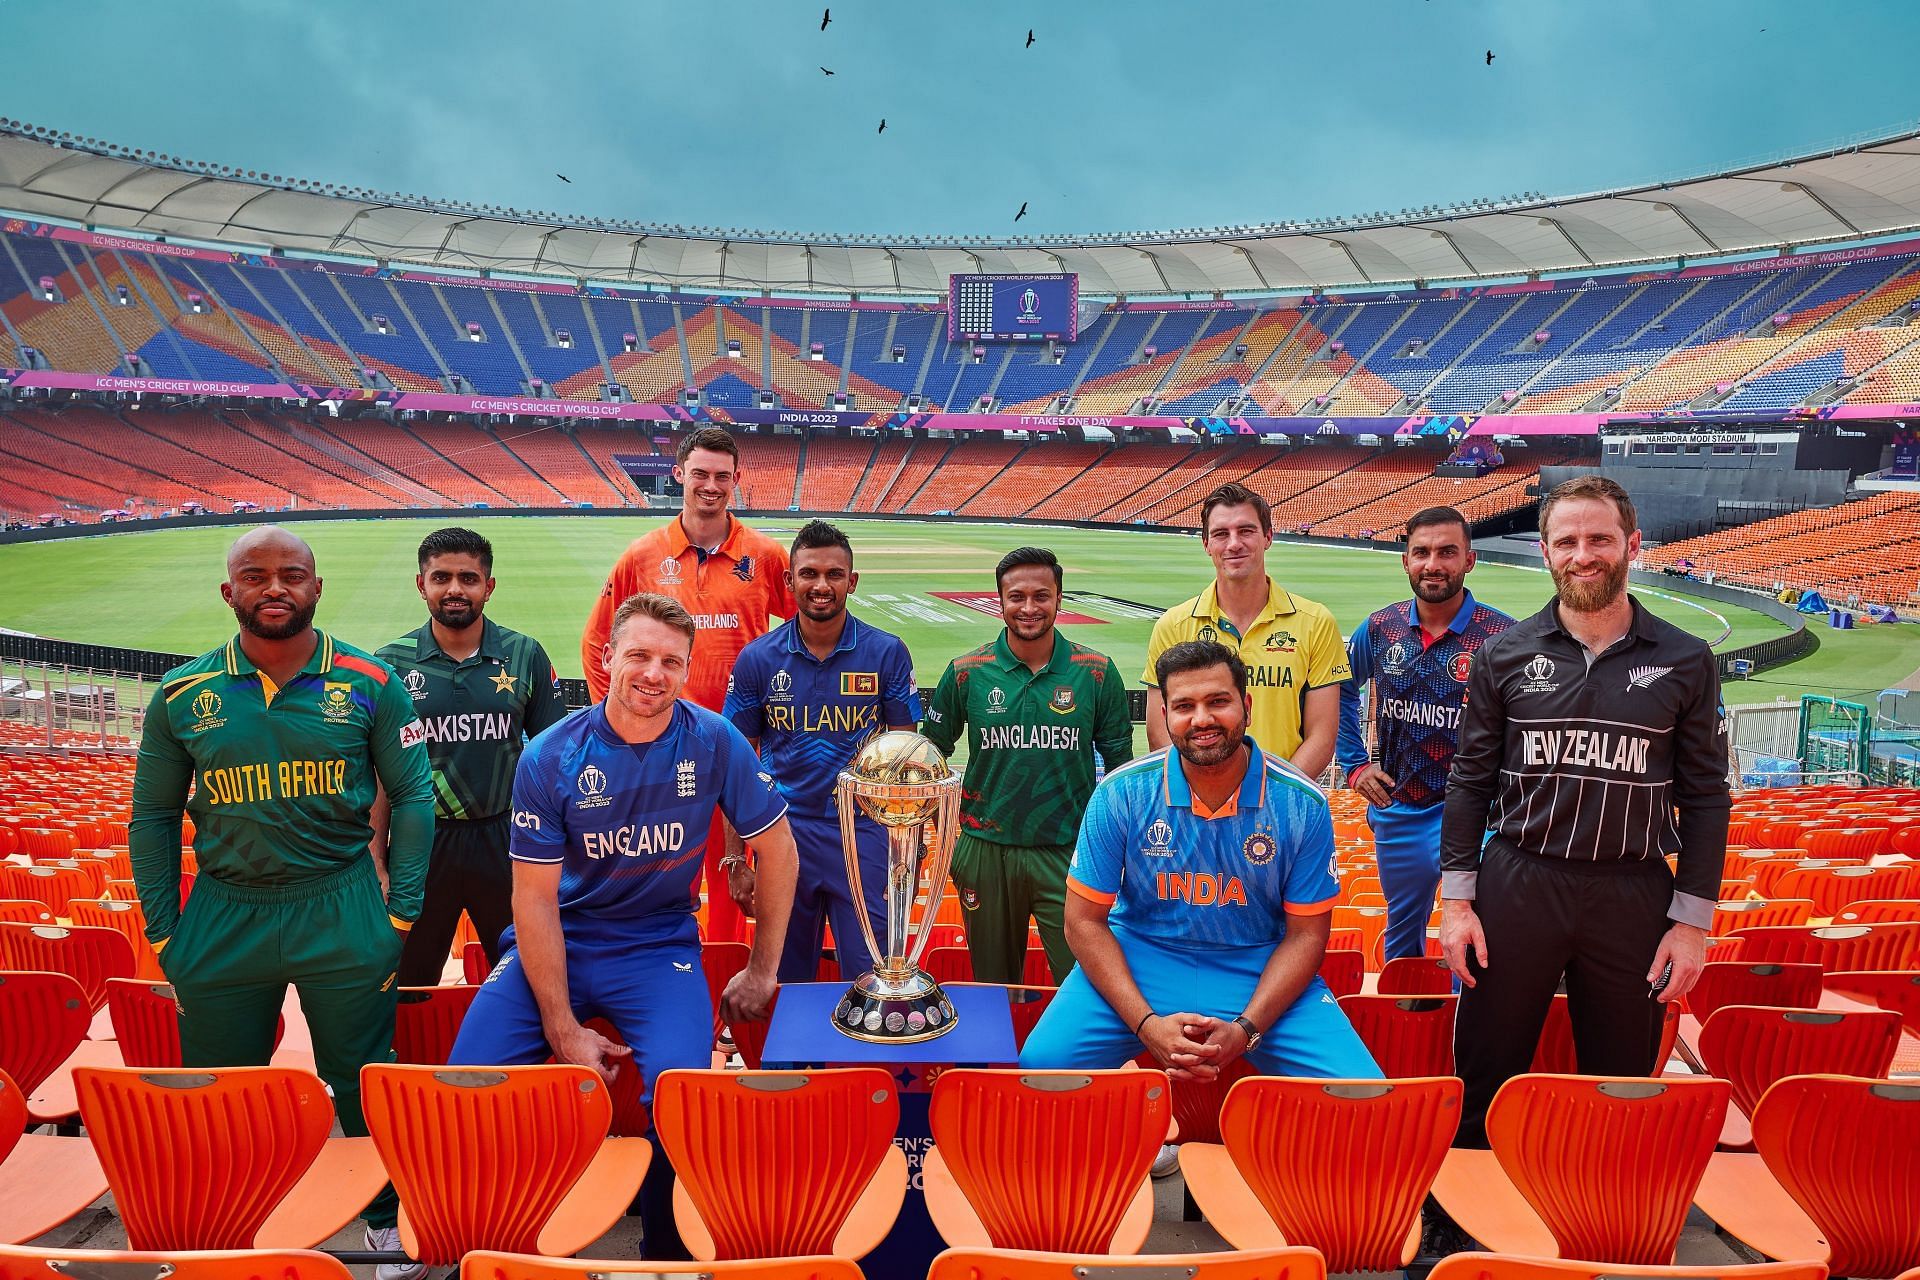 Captains posing with the World Cup trophy. (Credits: Twitter)